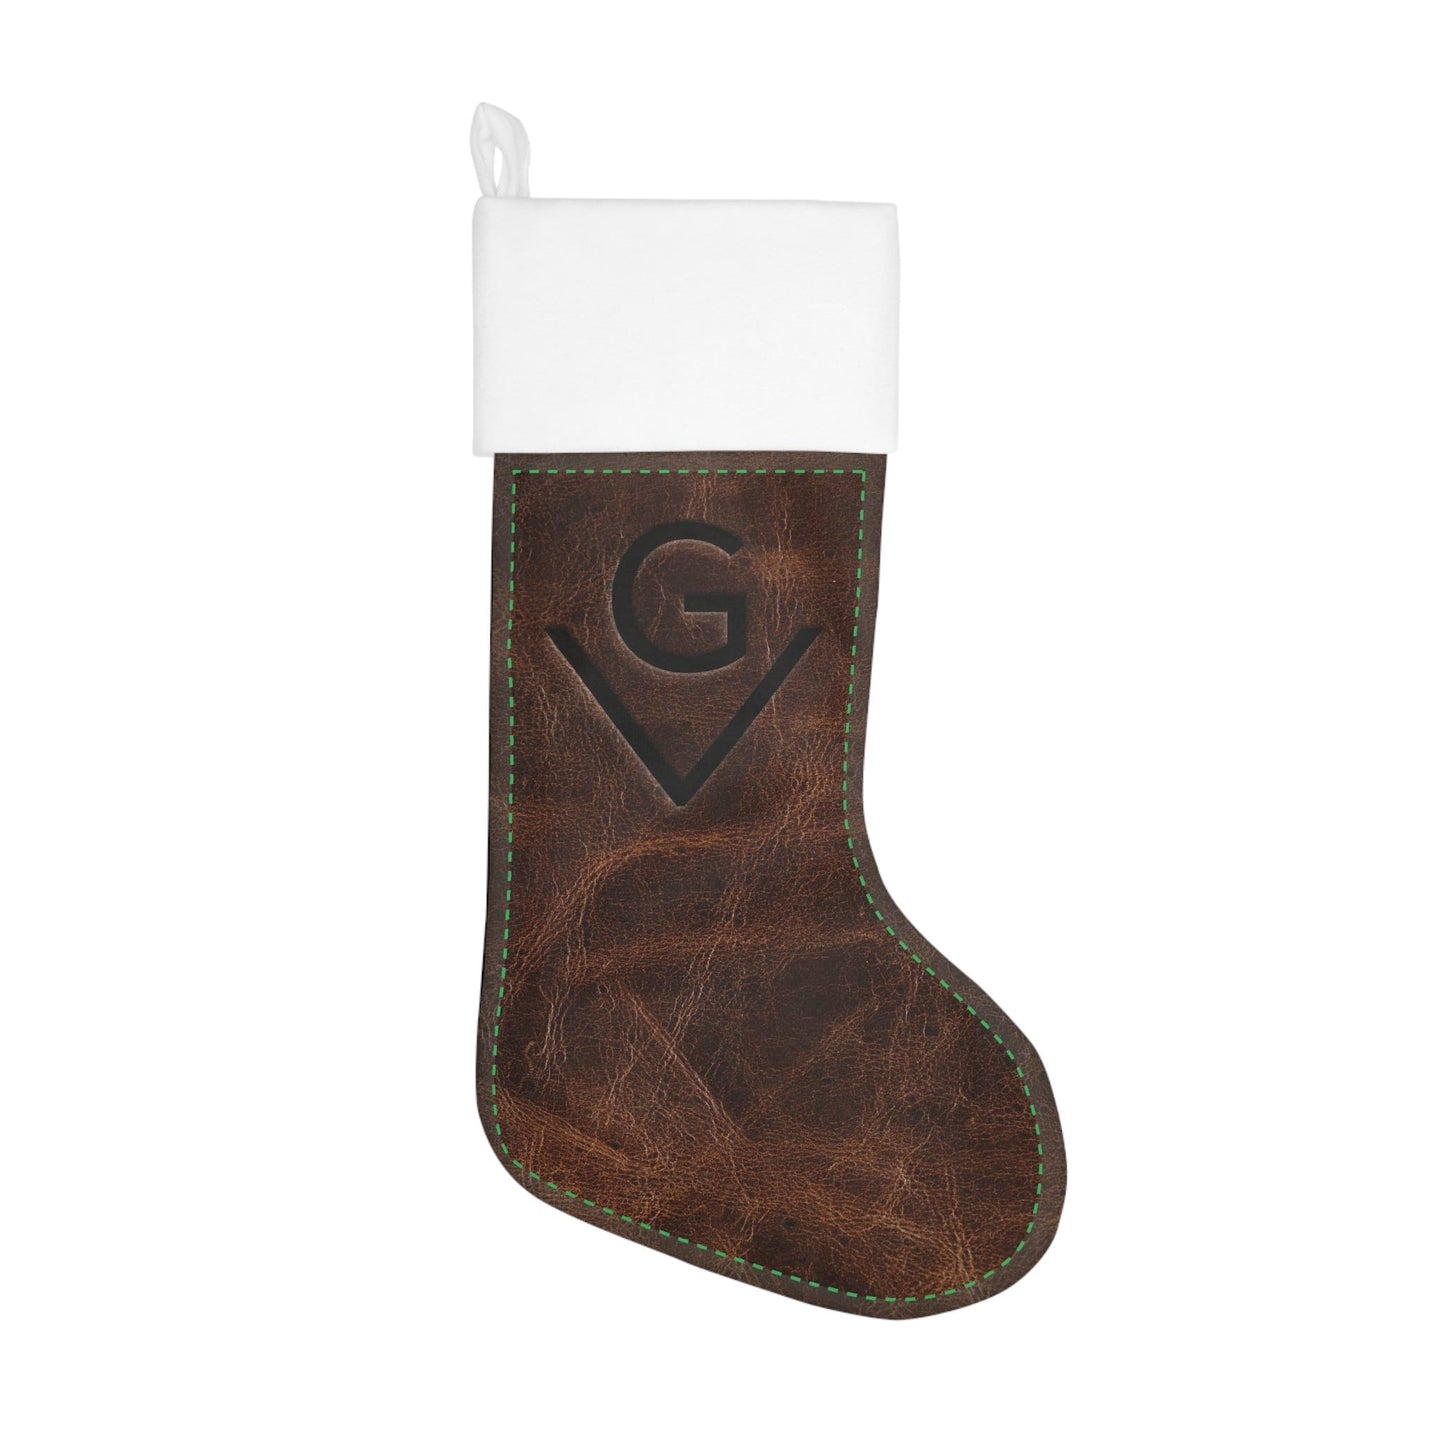 CUSTOM CATTLE BRAND Holiday Stocking Rustic Western Christmas Decorations Leather Pattern Printed Cowboy Ranch Livestock Brand Stocking